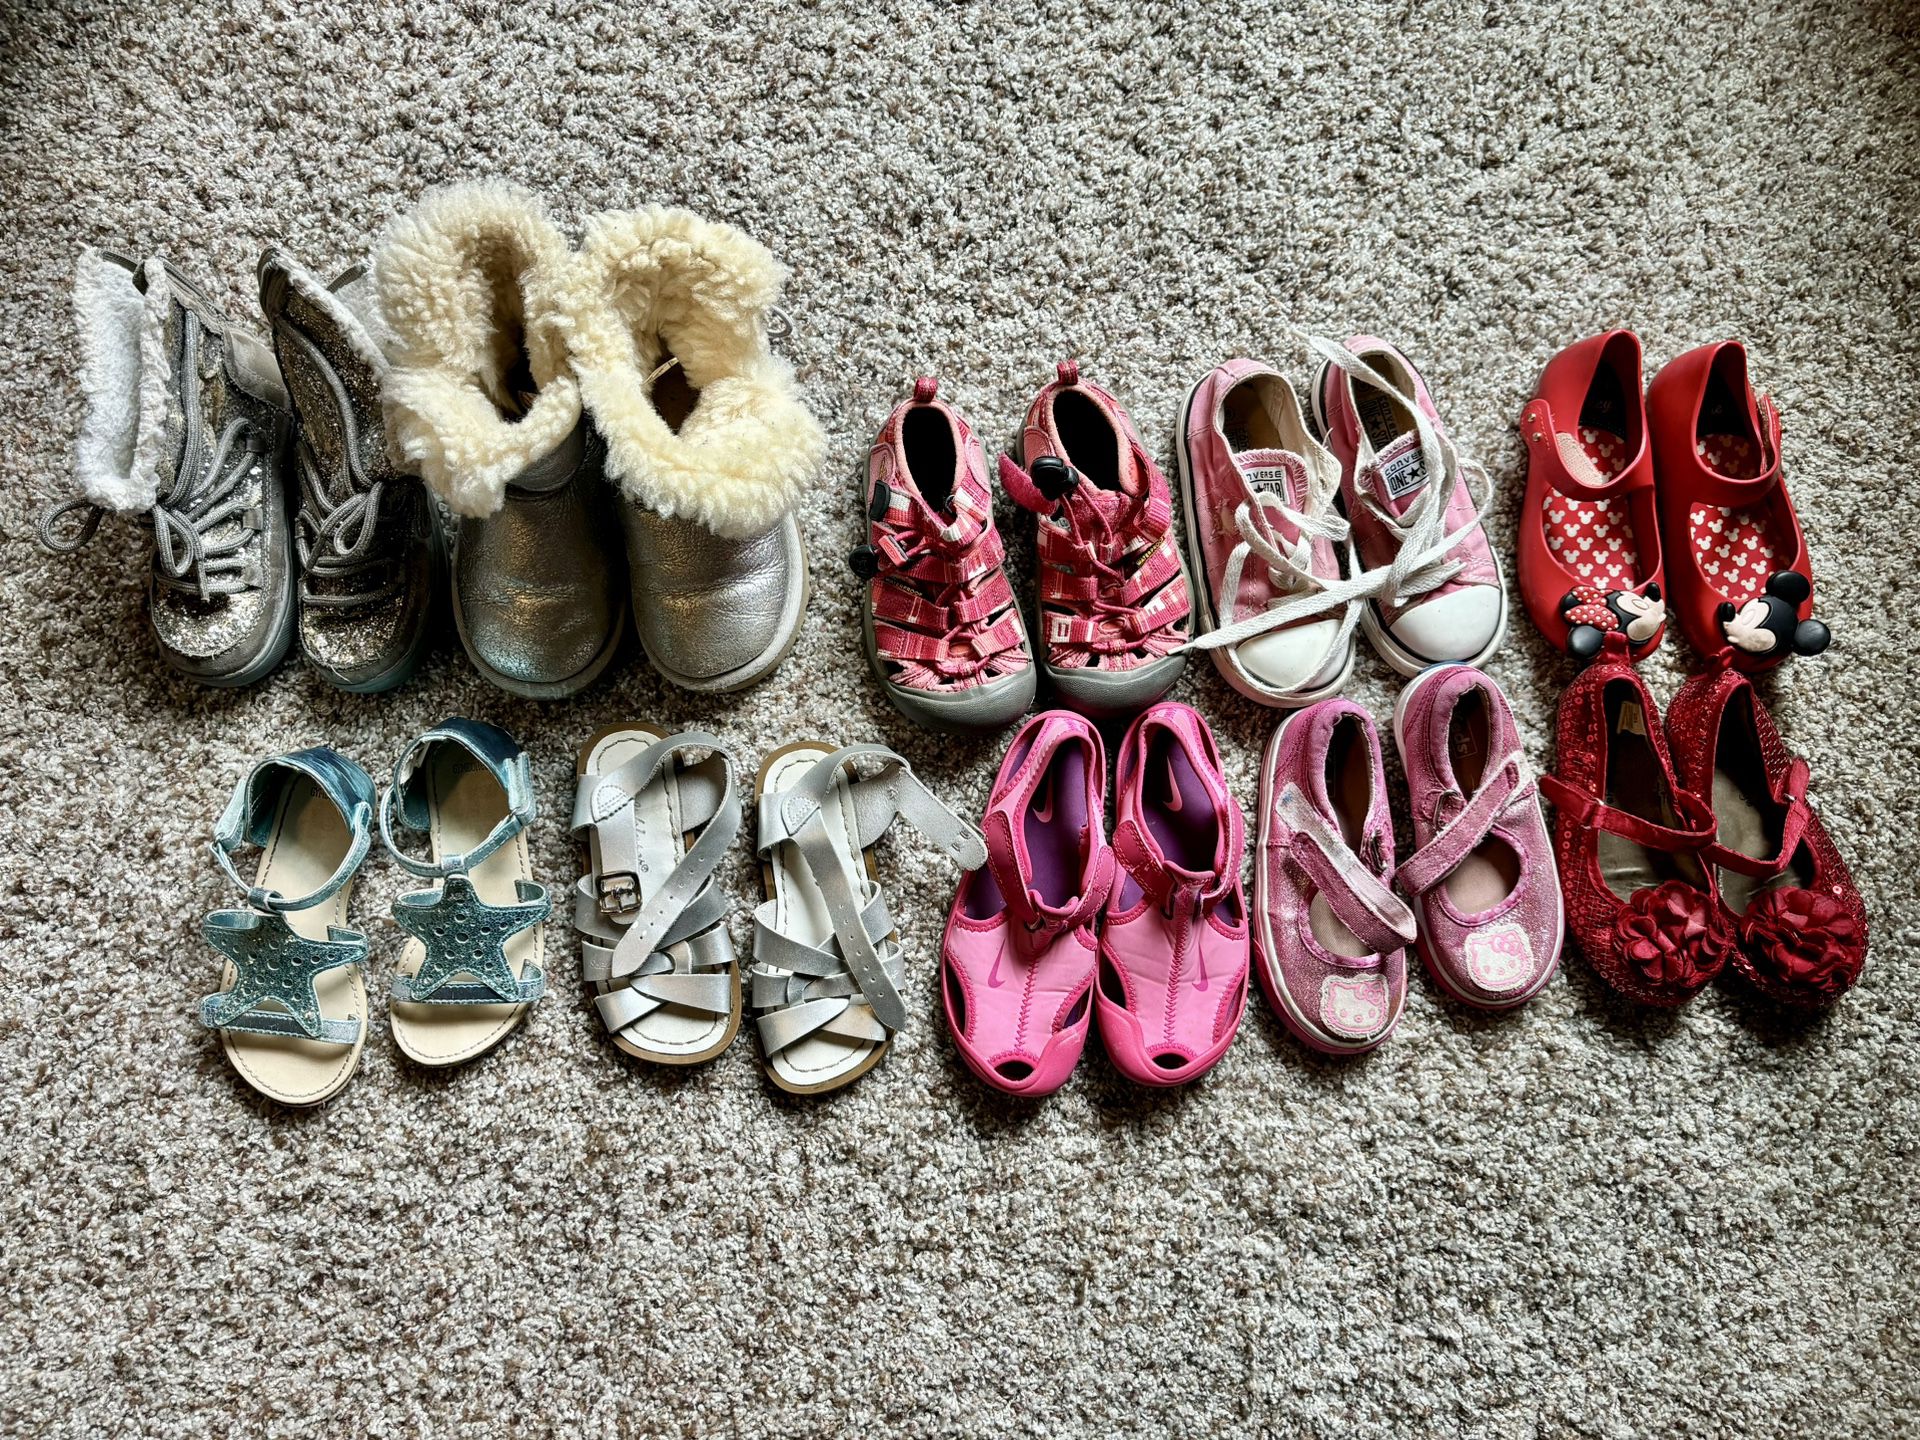 Size 9 Girls/Toddler Shoes - Uggs, Cowboy Boots Etc.